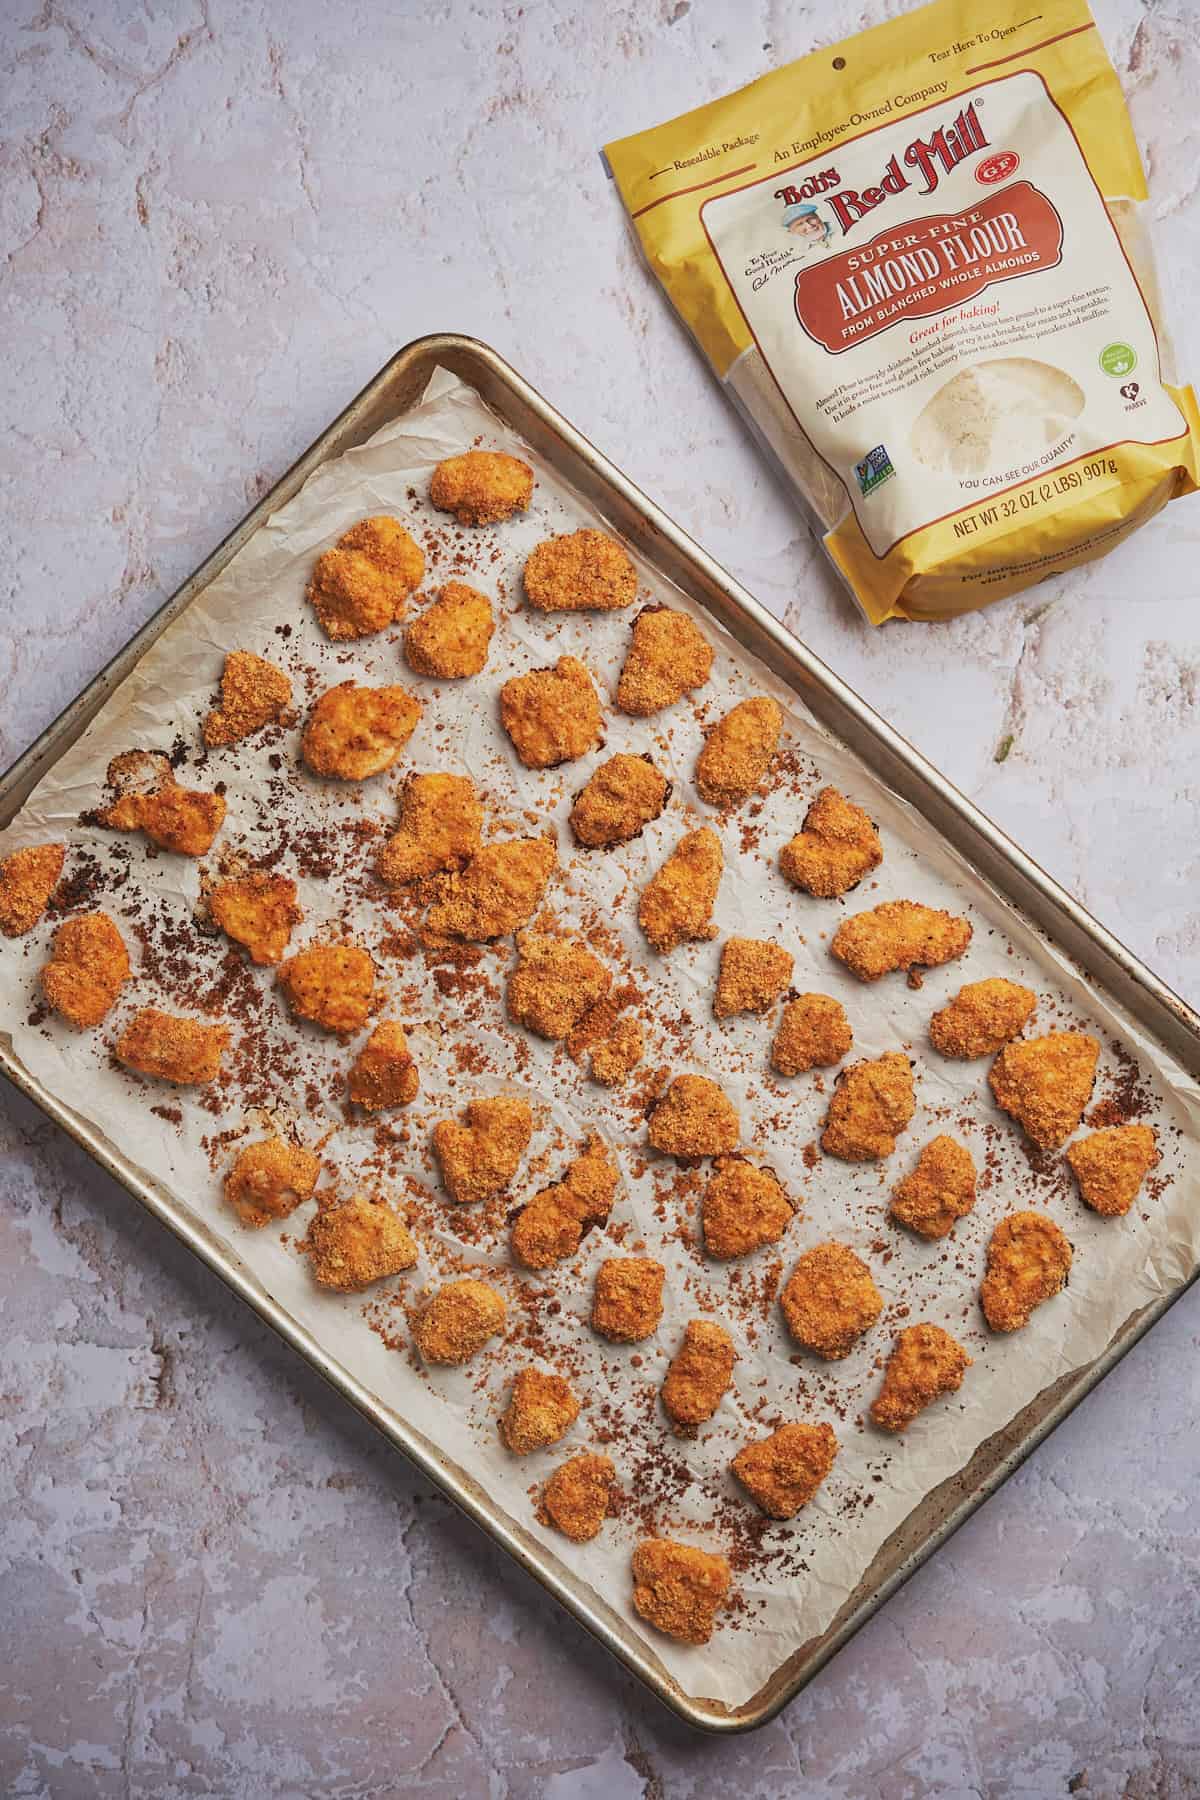 baked chicken nuggets on a baking sheet next to a bag of bob's red mill almond flour